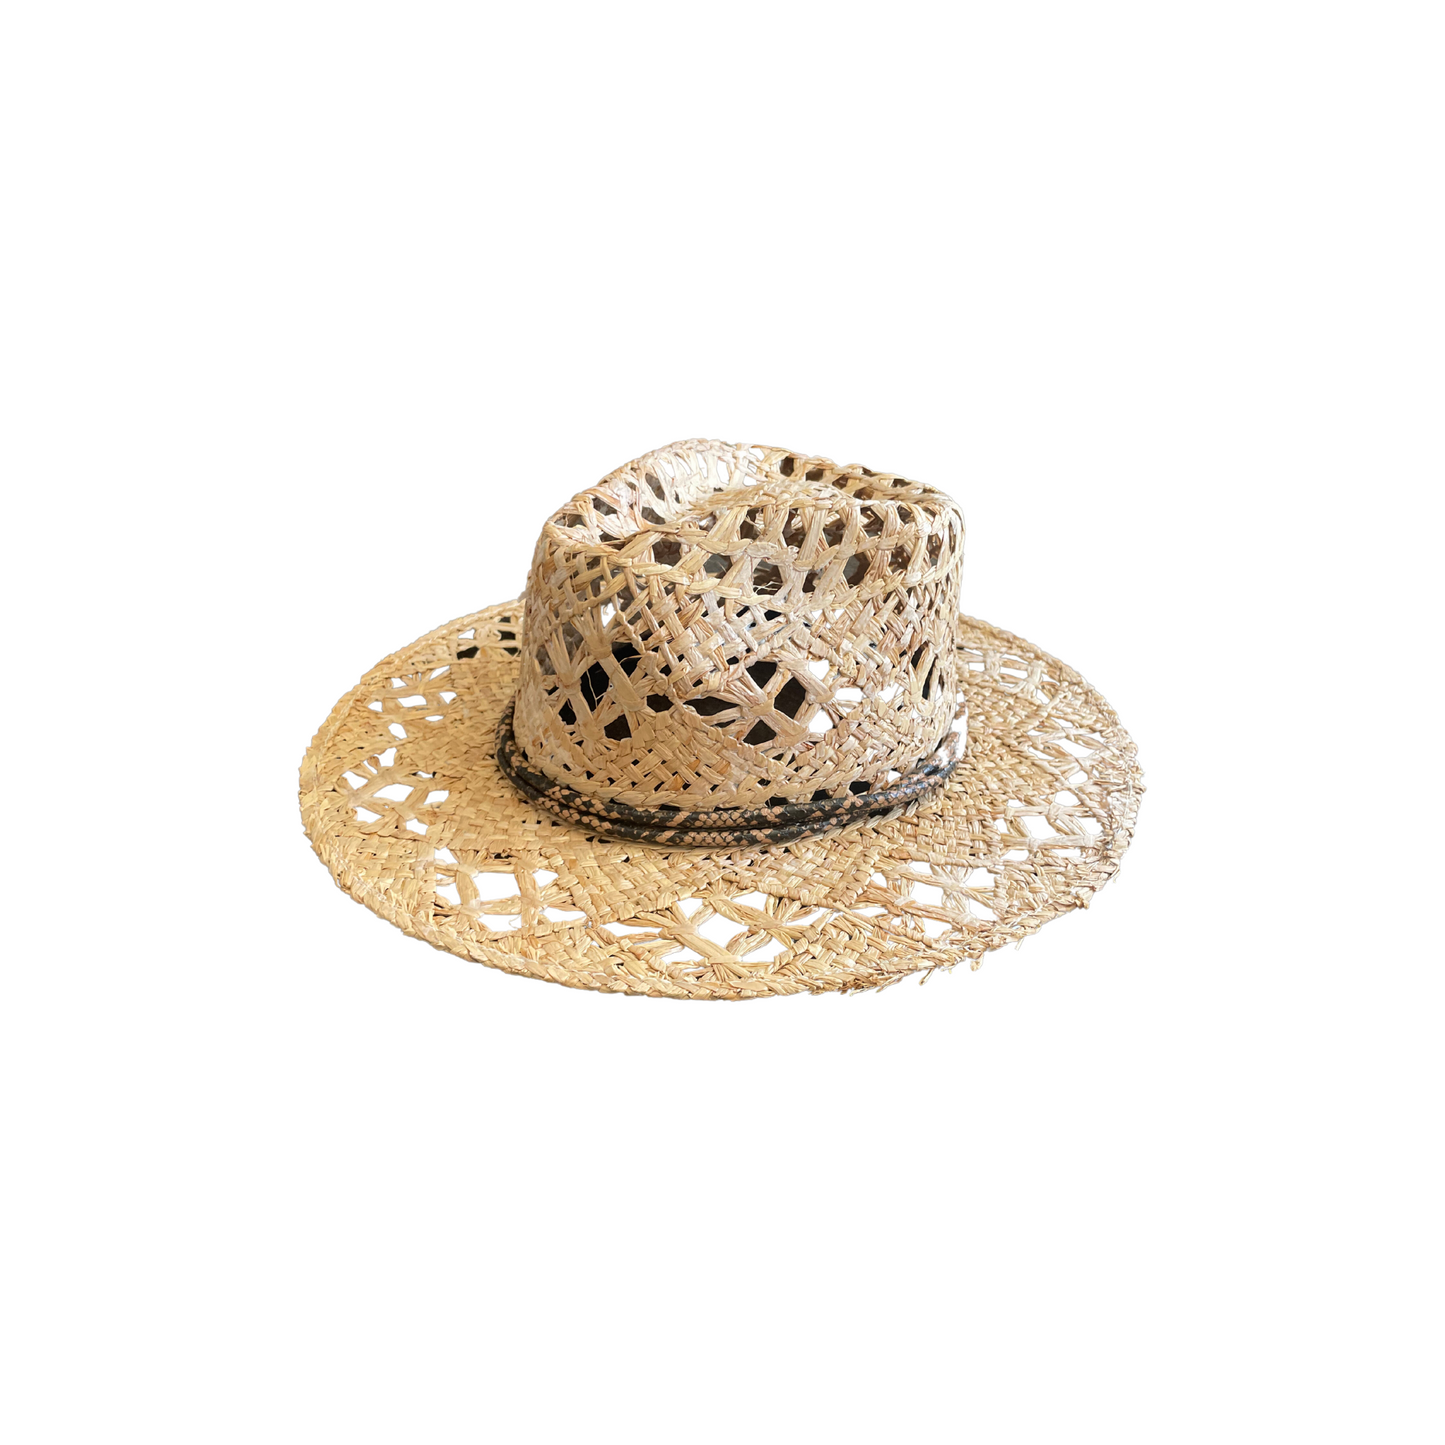 Straw Hat with Brown Snake Skin Hat Band